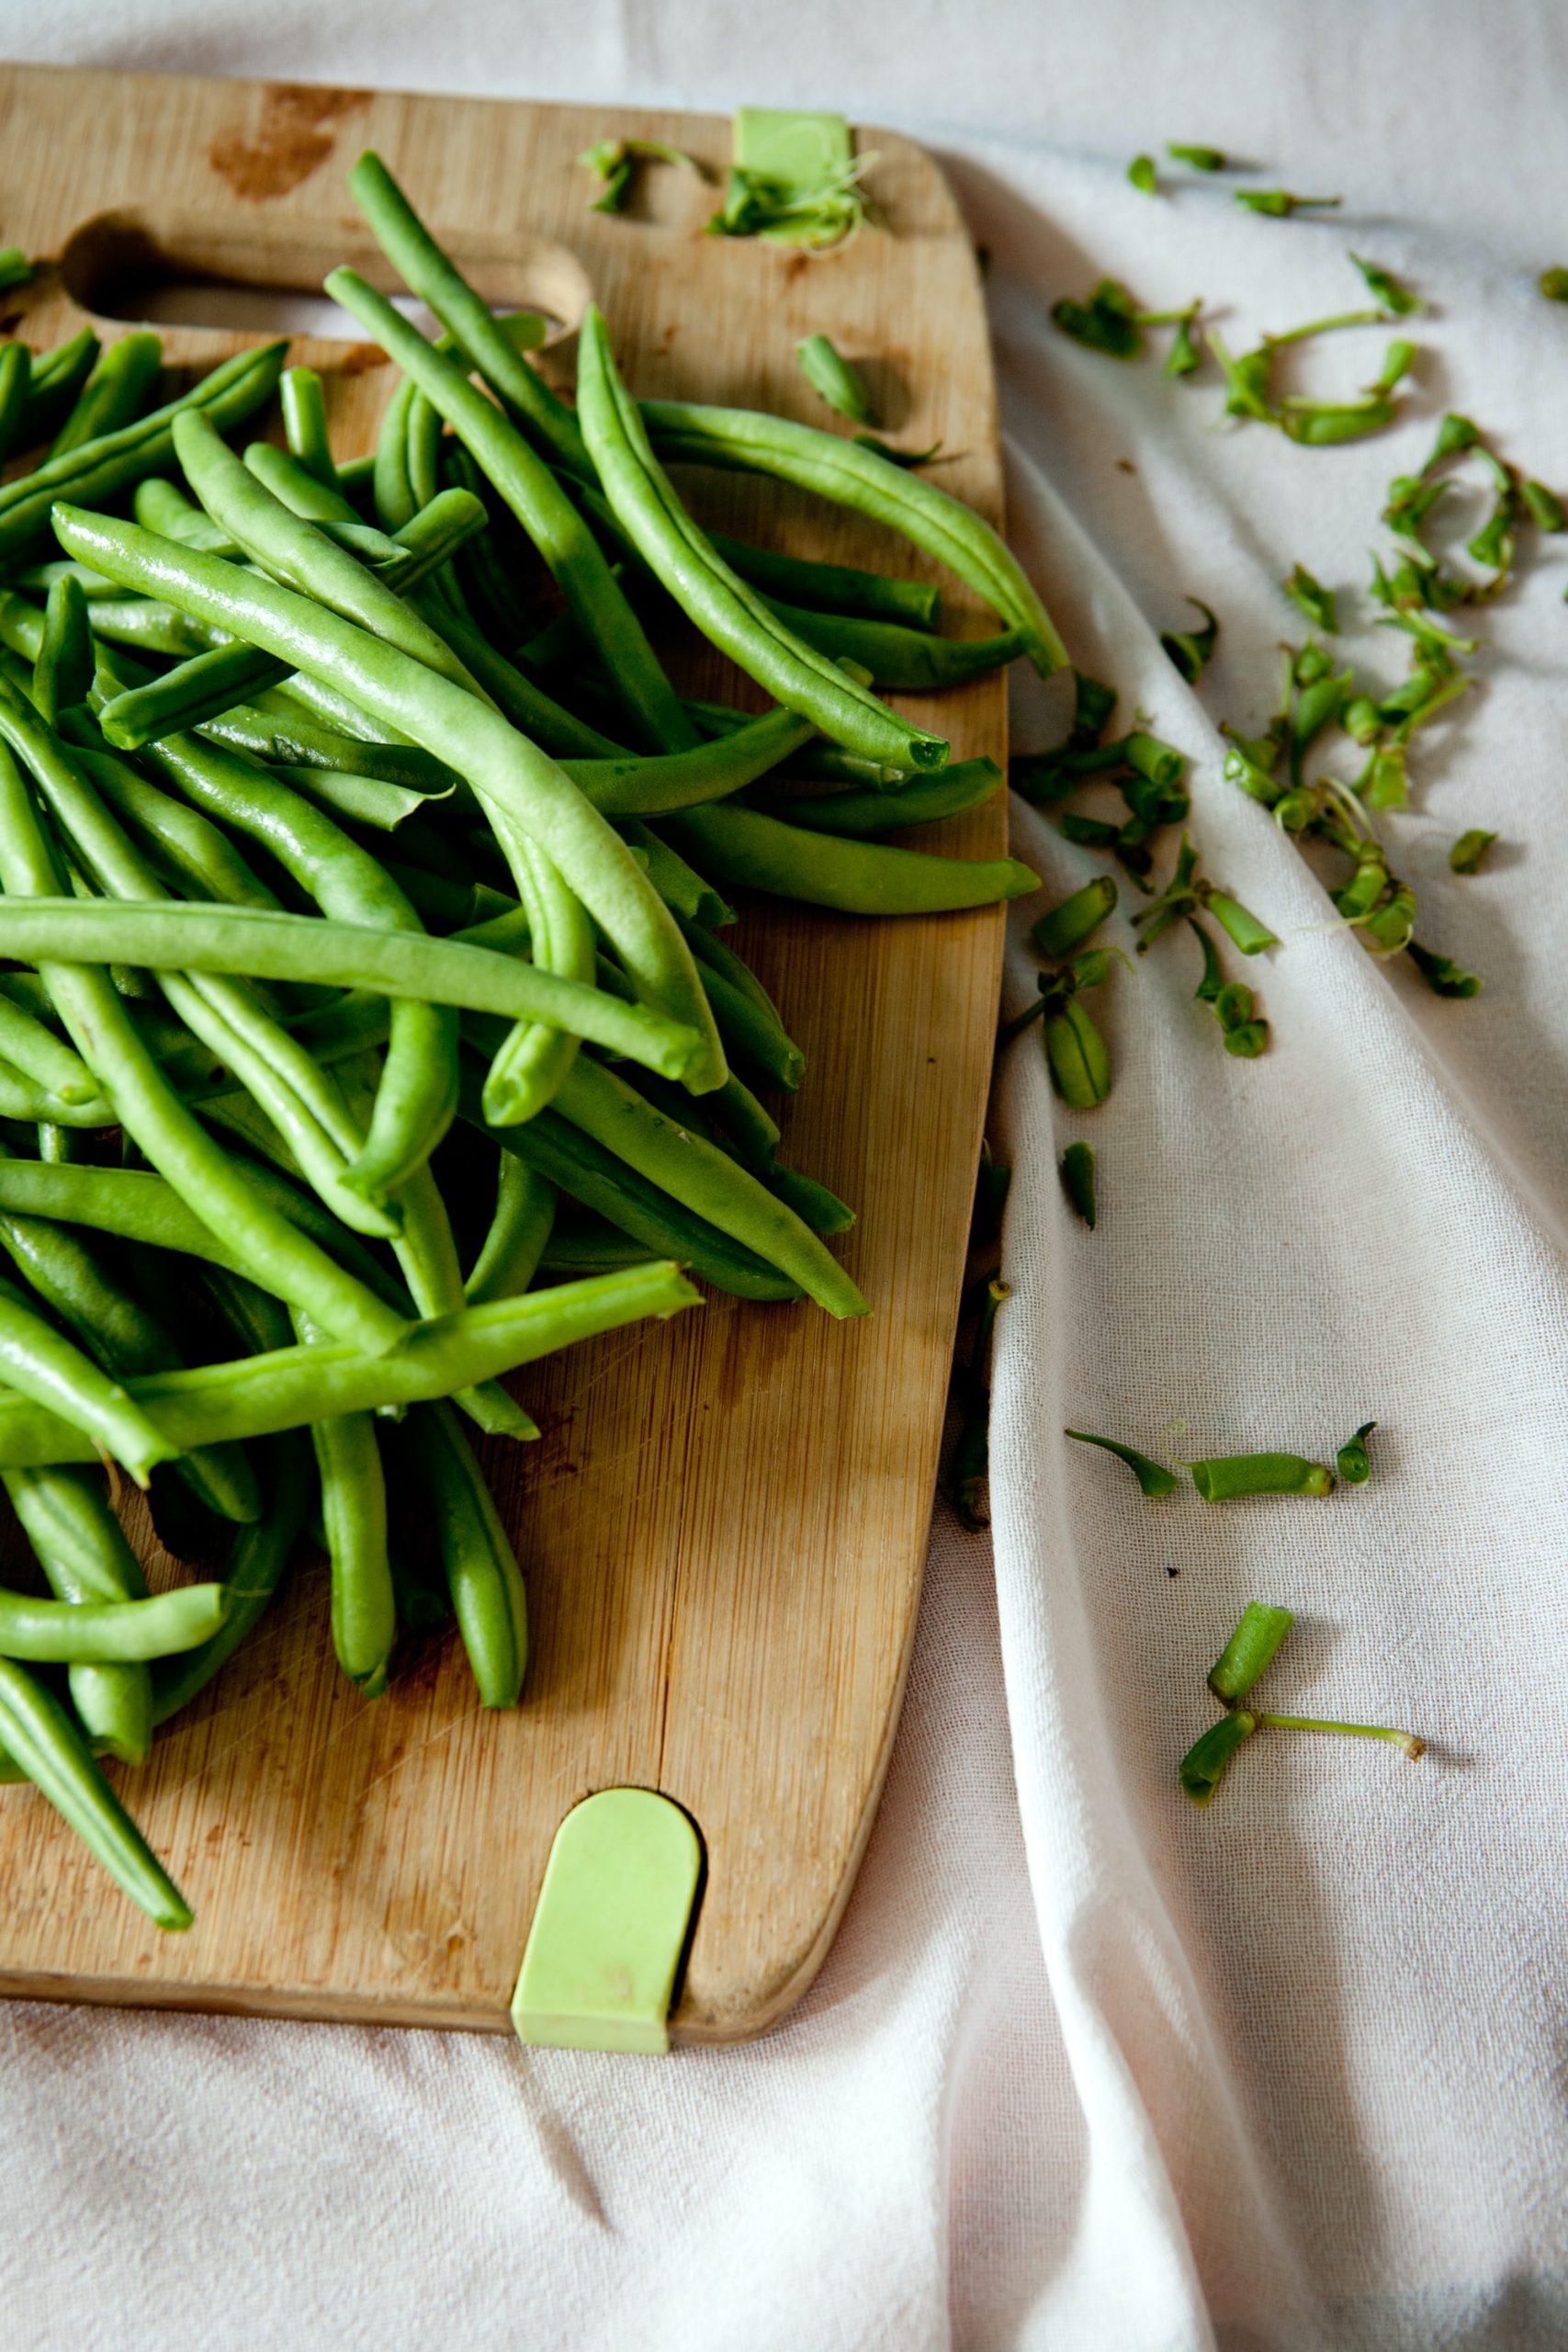 Are Bush or Pole Beans Better?